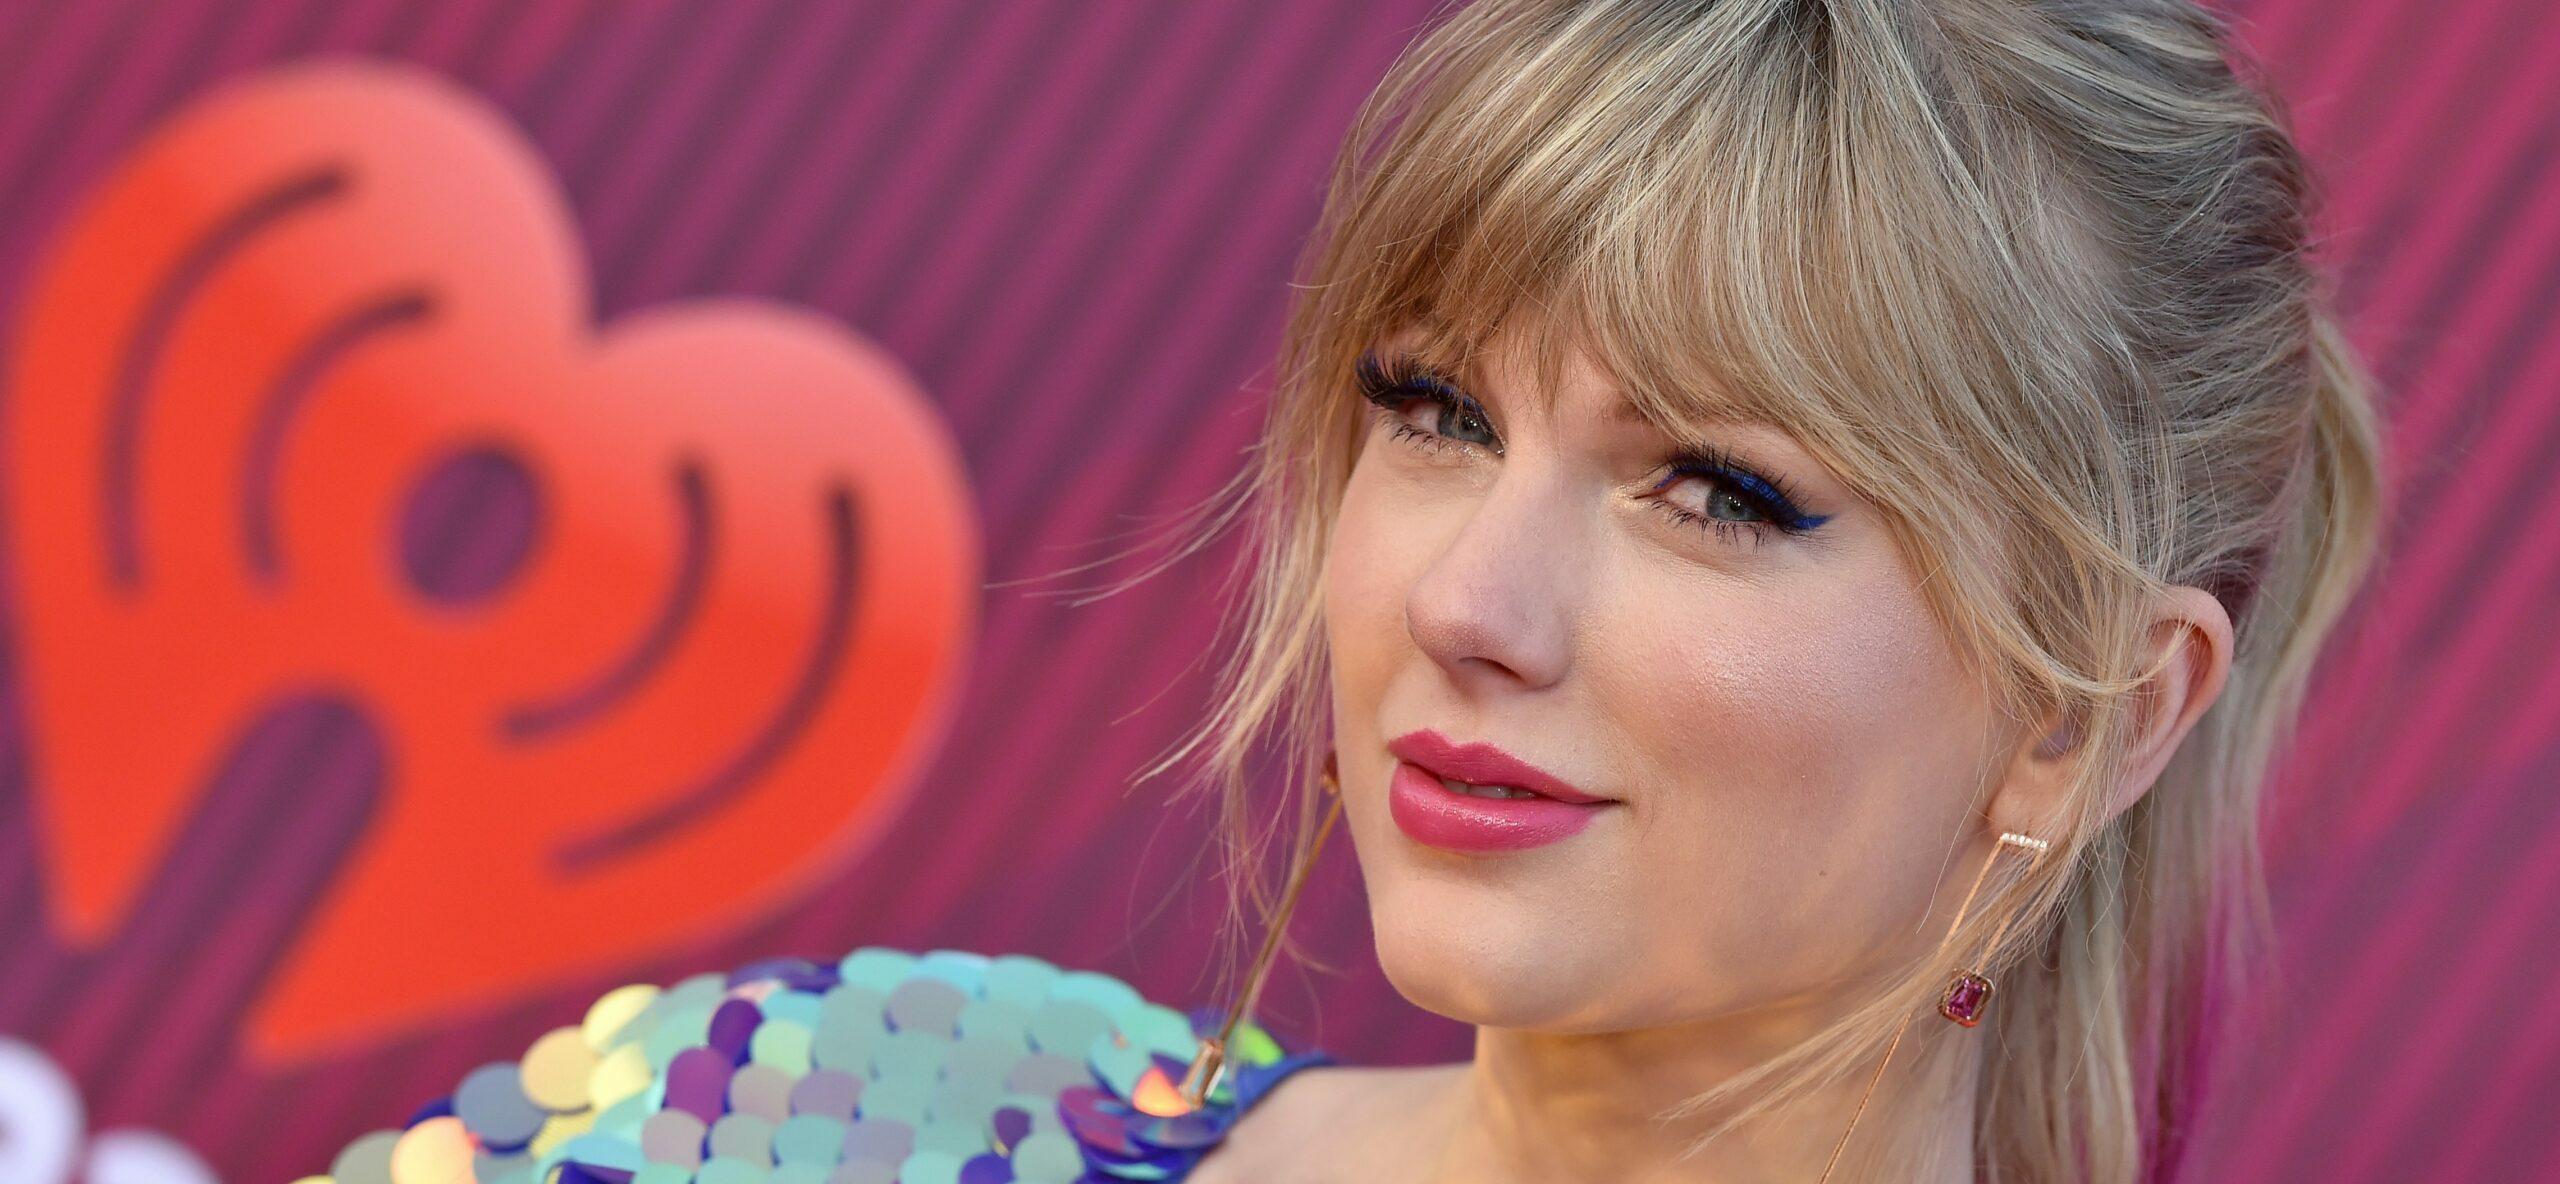 Taylor Swift on 'Jeopardy!,' Takes Over Every Category: Fan